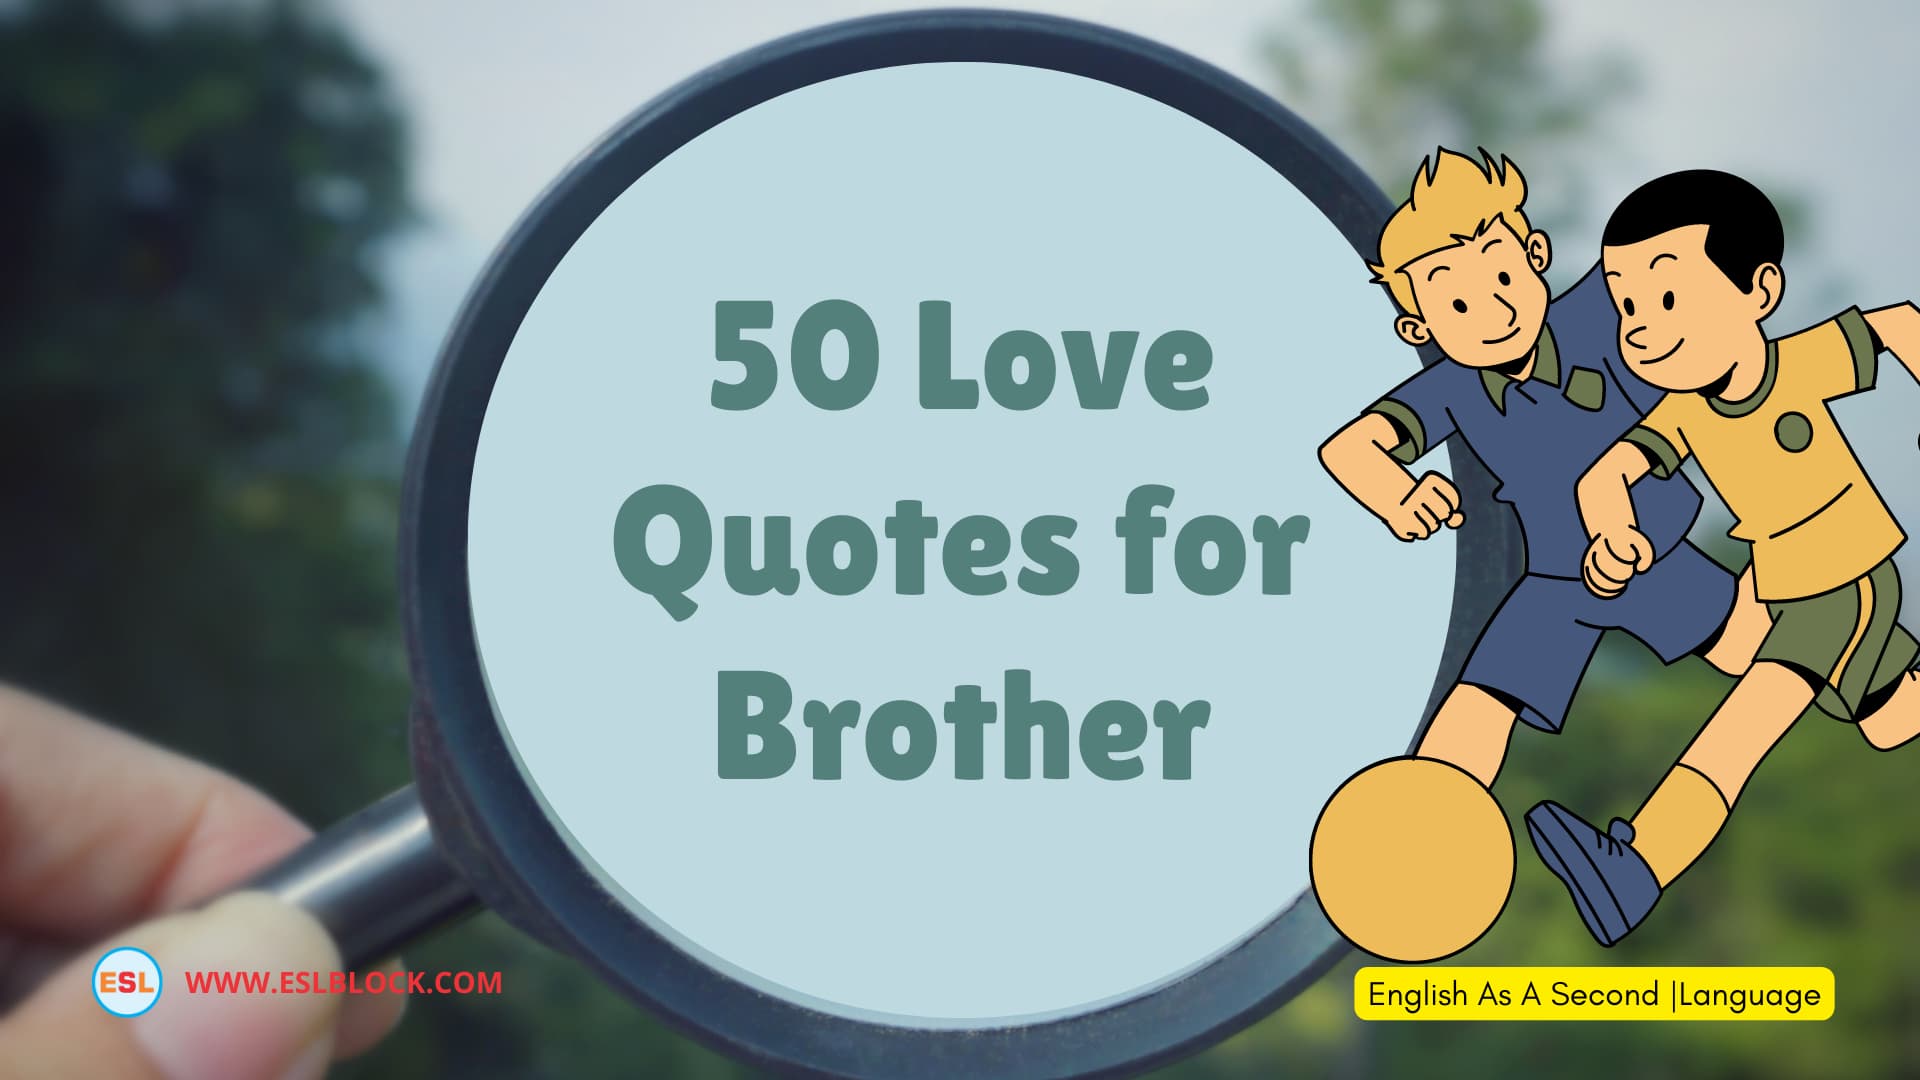 50 Love Quotes for Brother